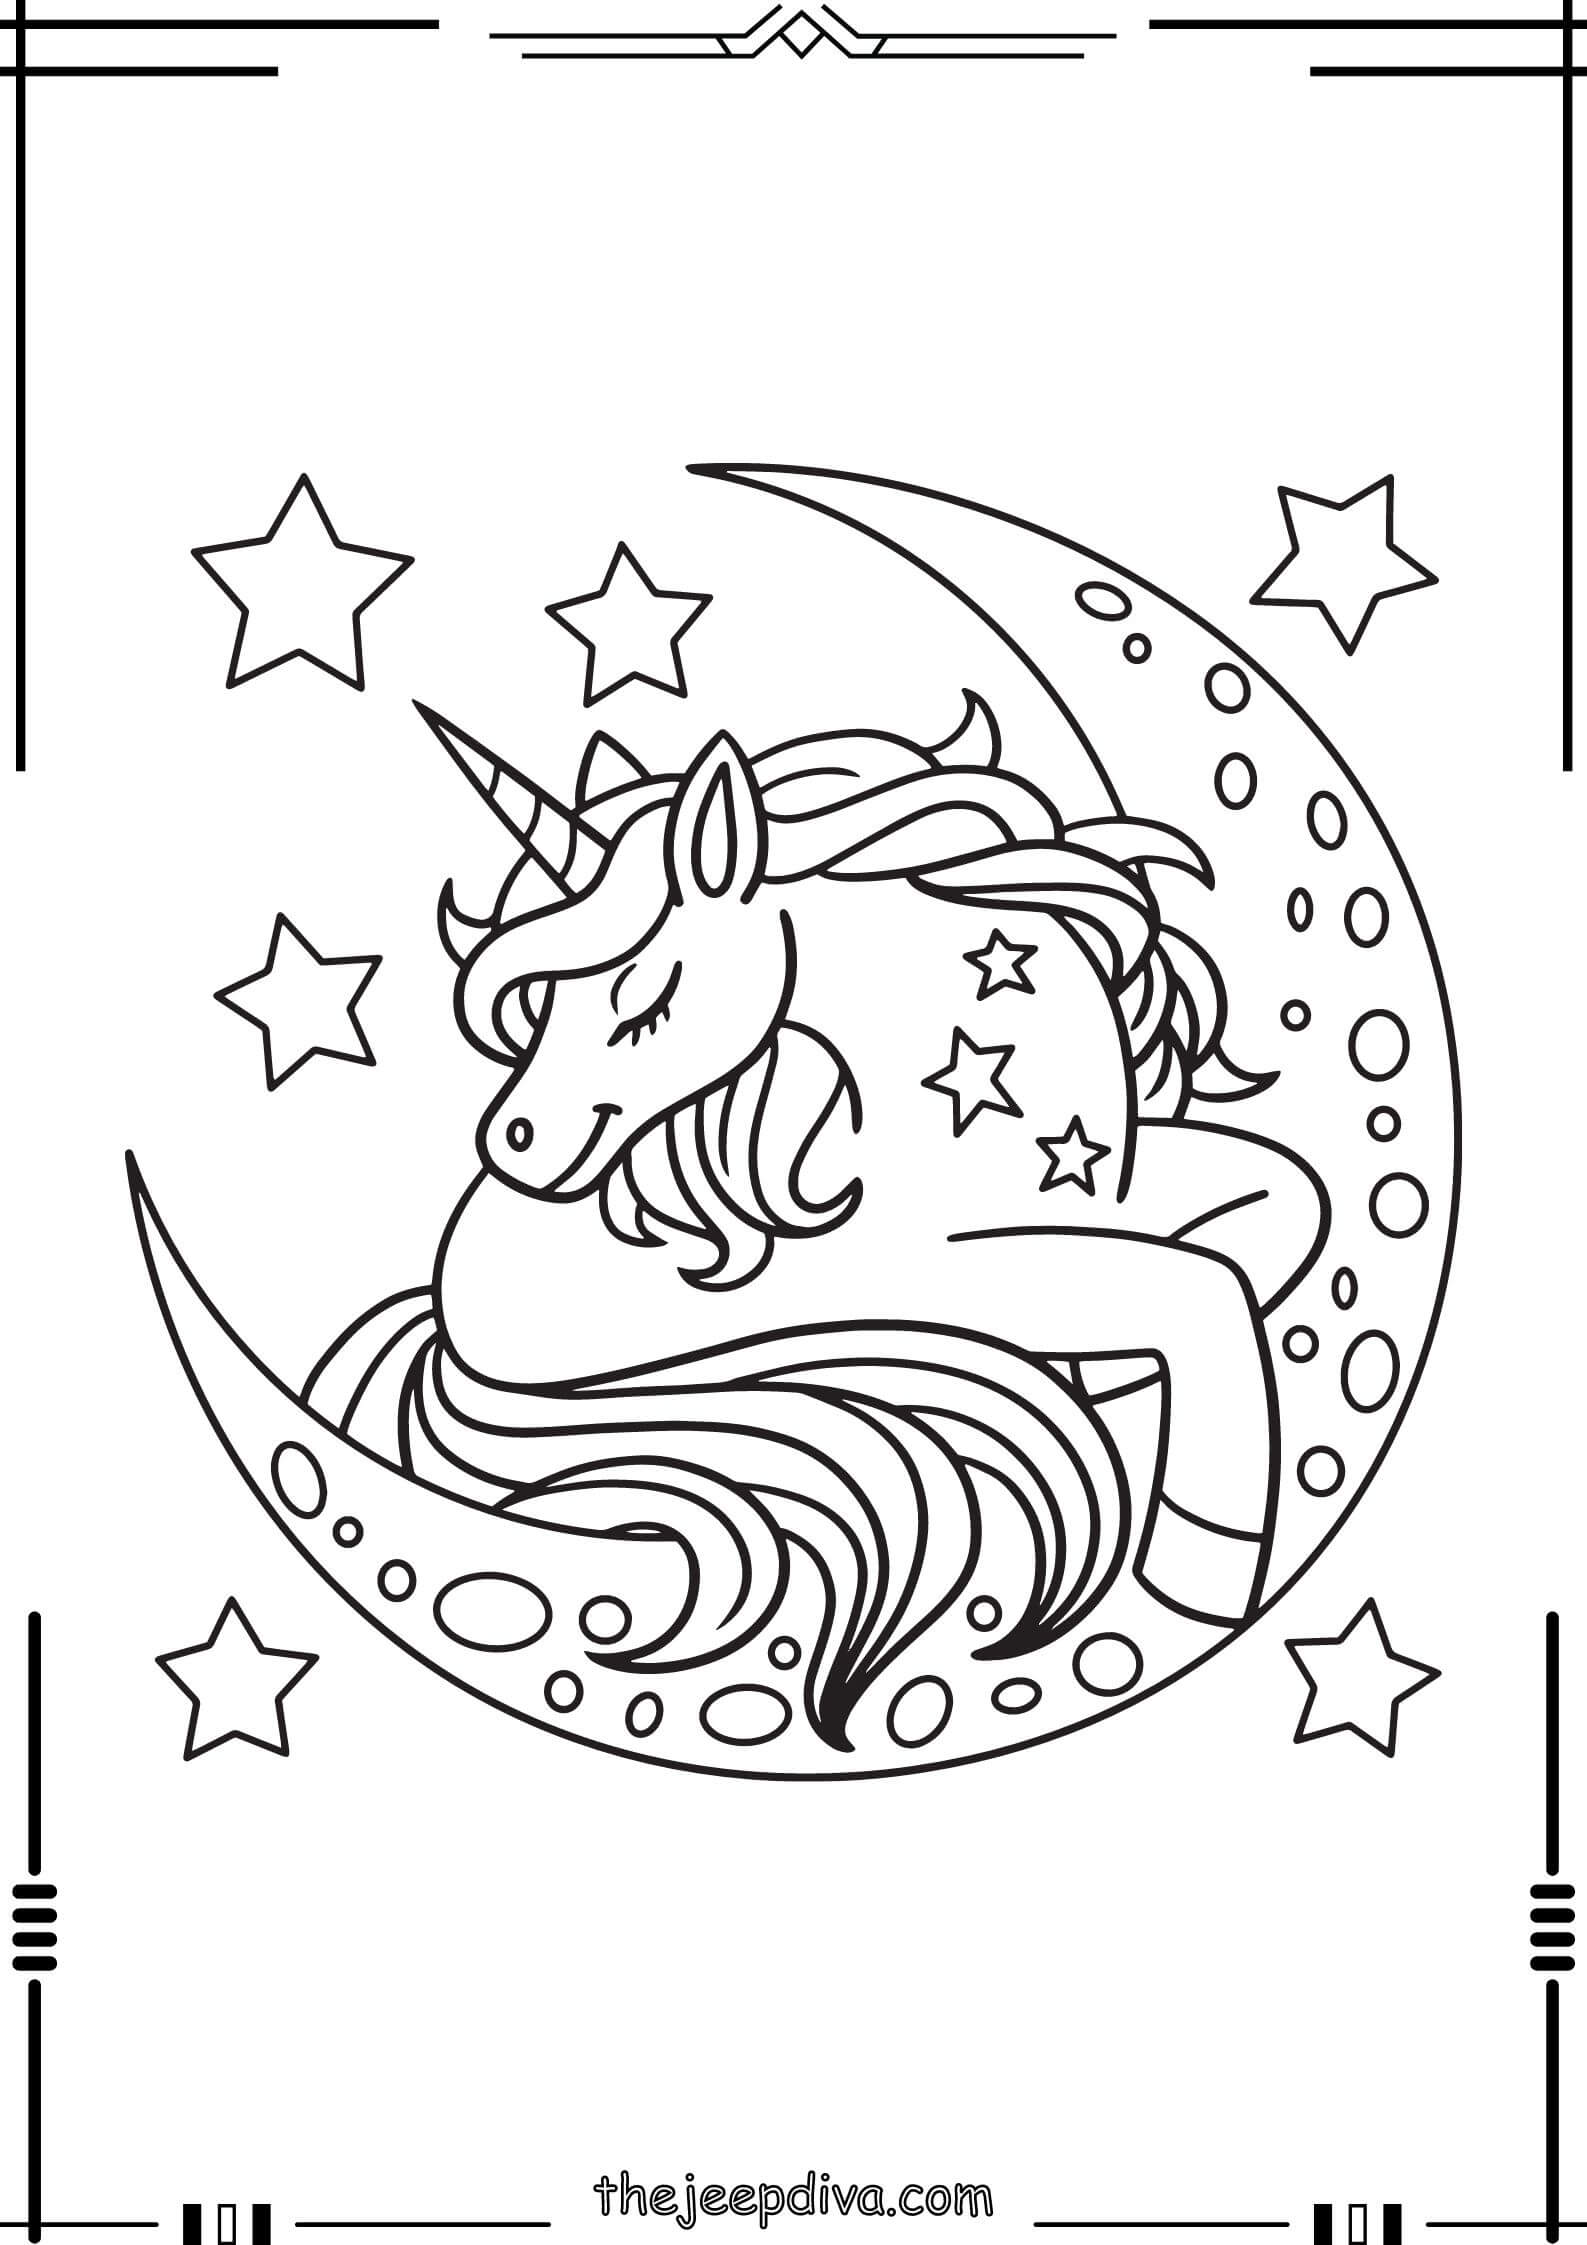 unicorn-coloring-page-easy-18